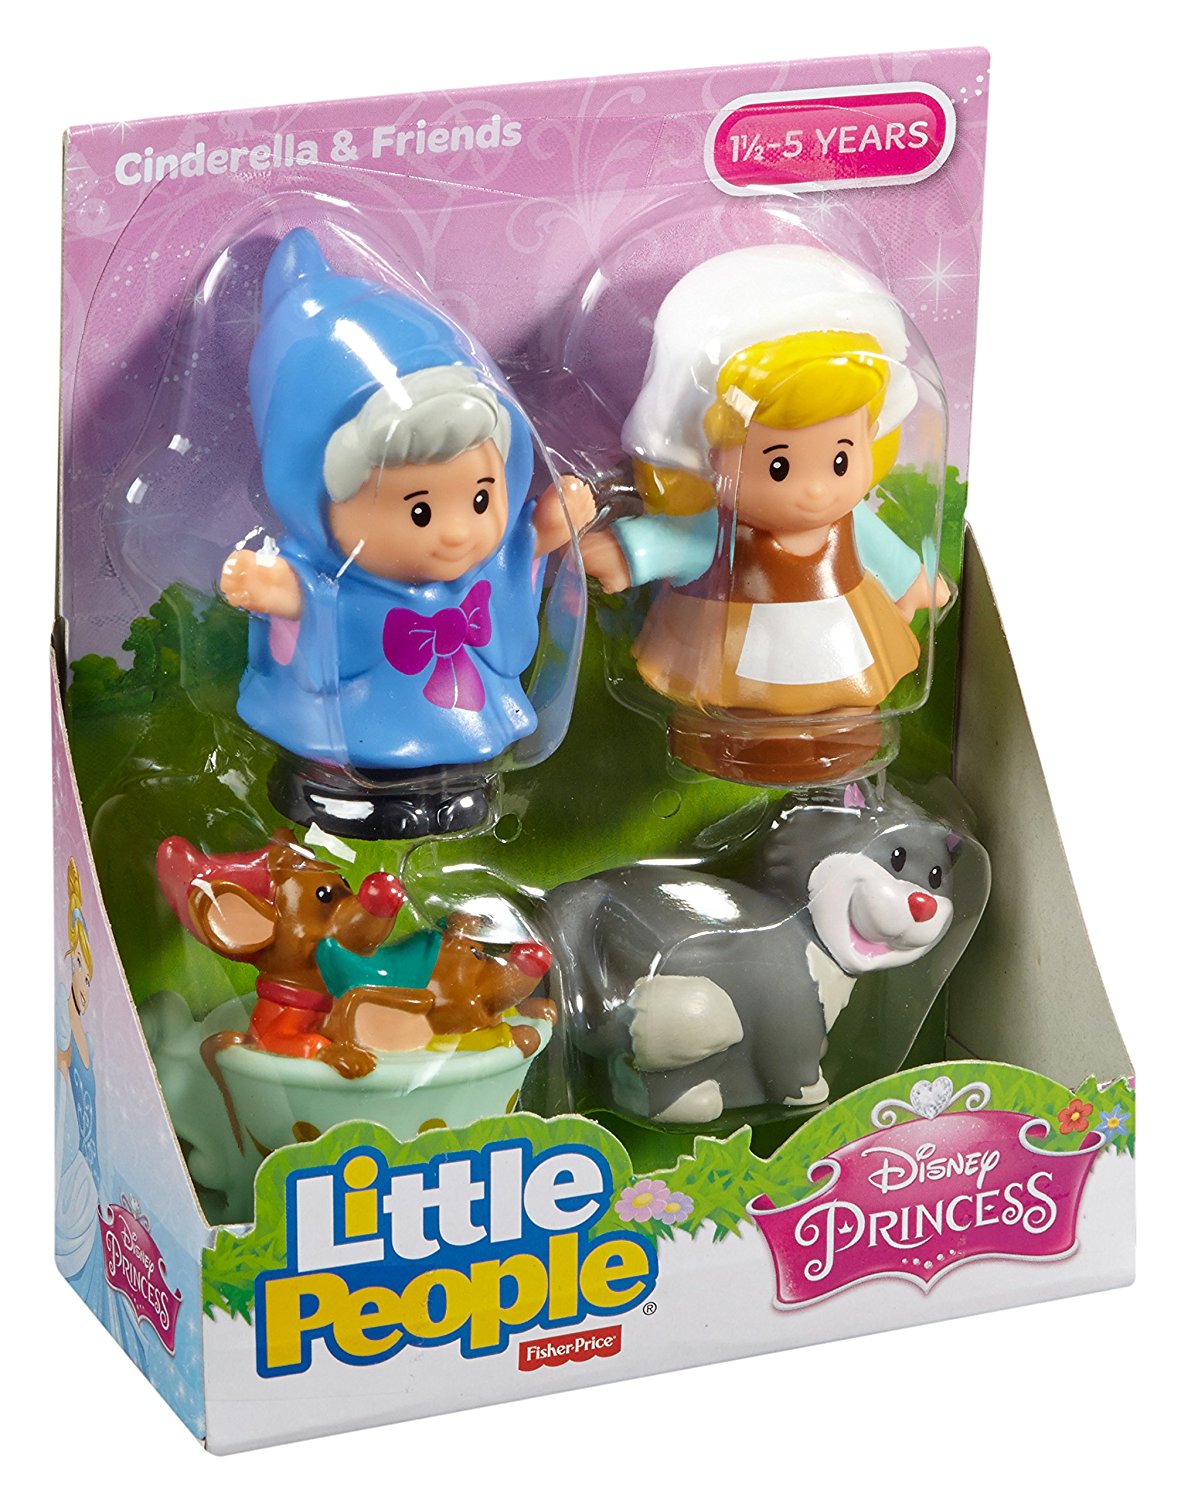 fisher price little people princess